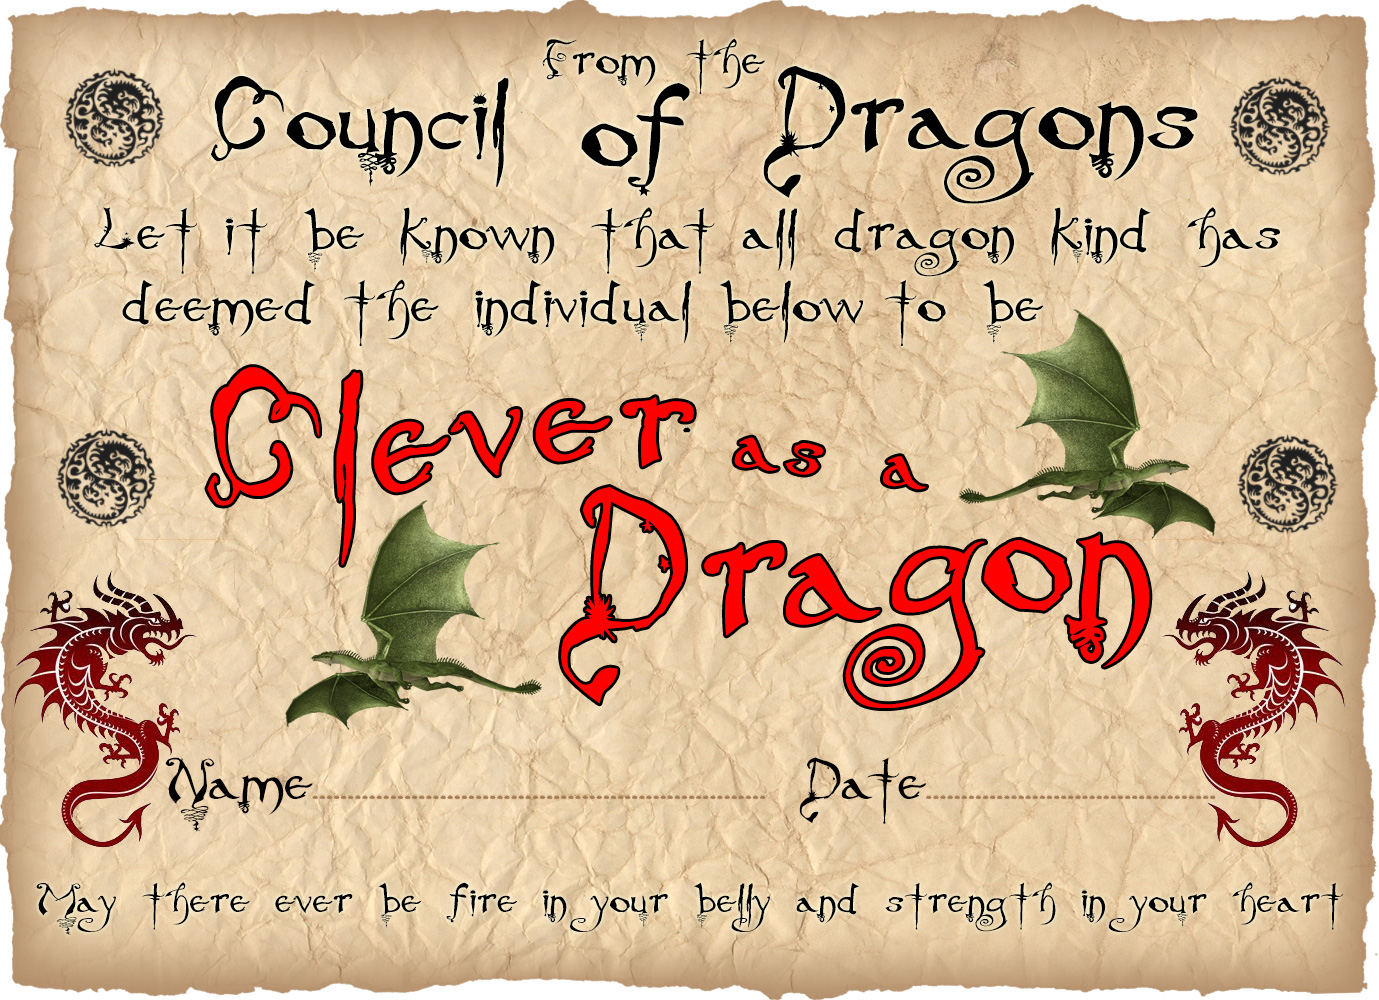 Printable children's certificate saying you've been as clever as a dragon.